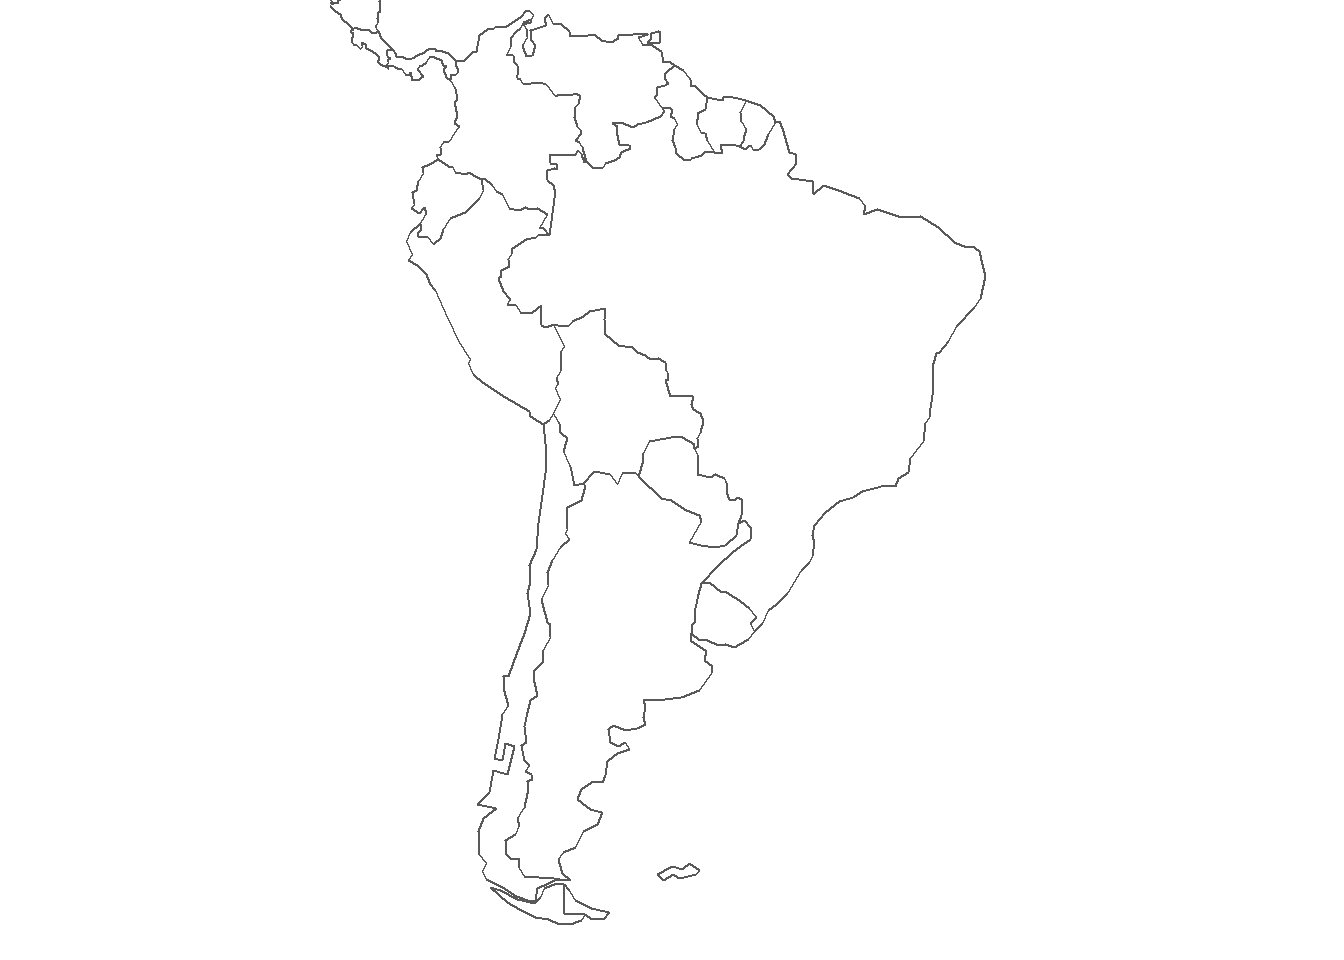 Zooming-In on South America